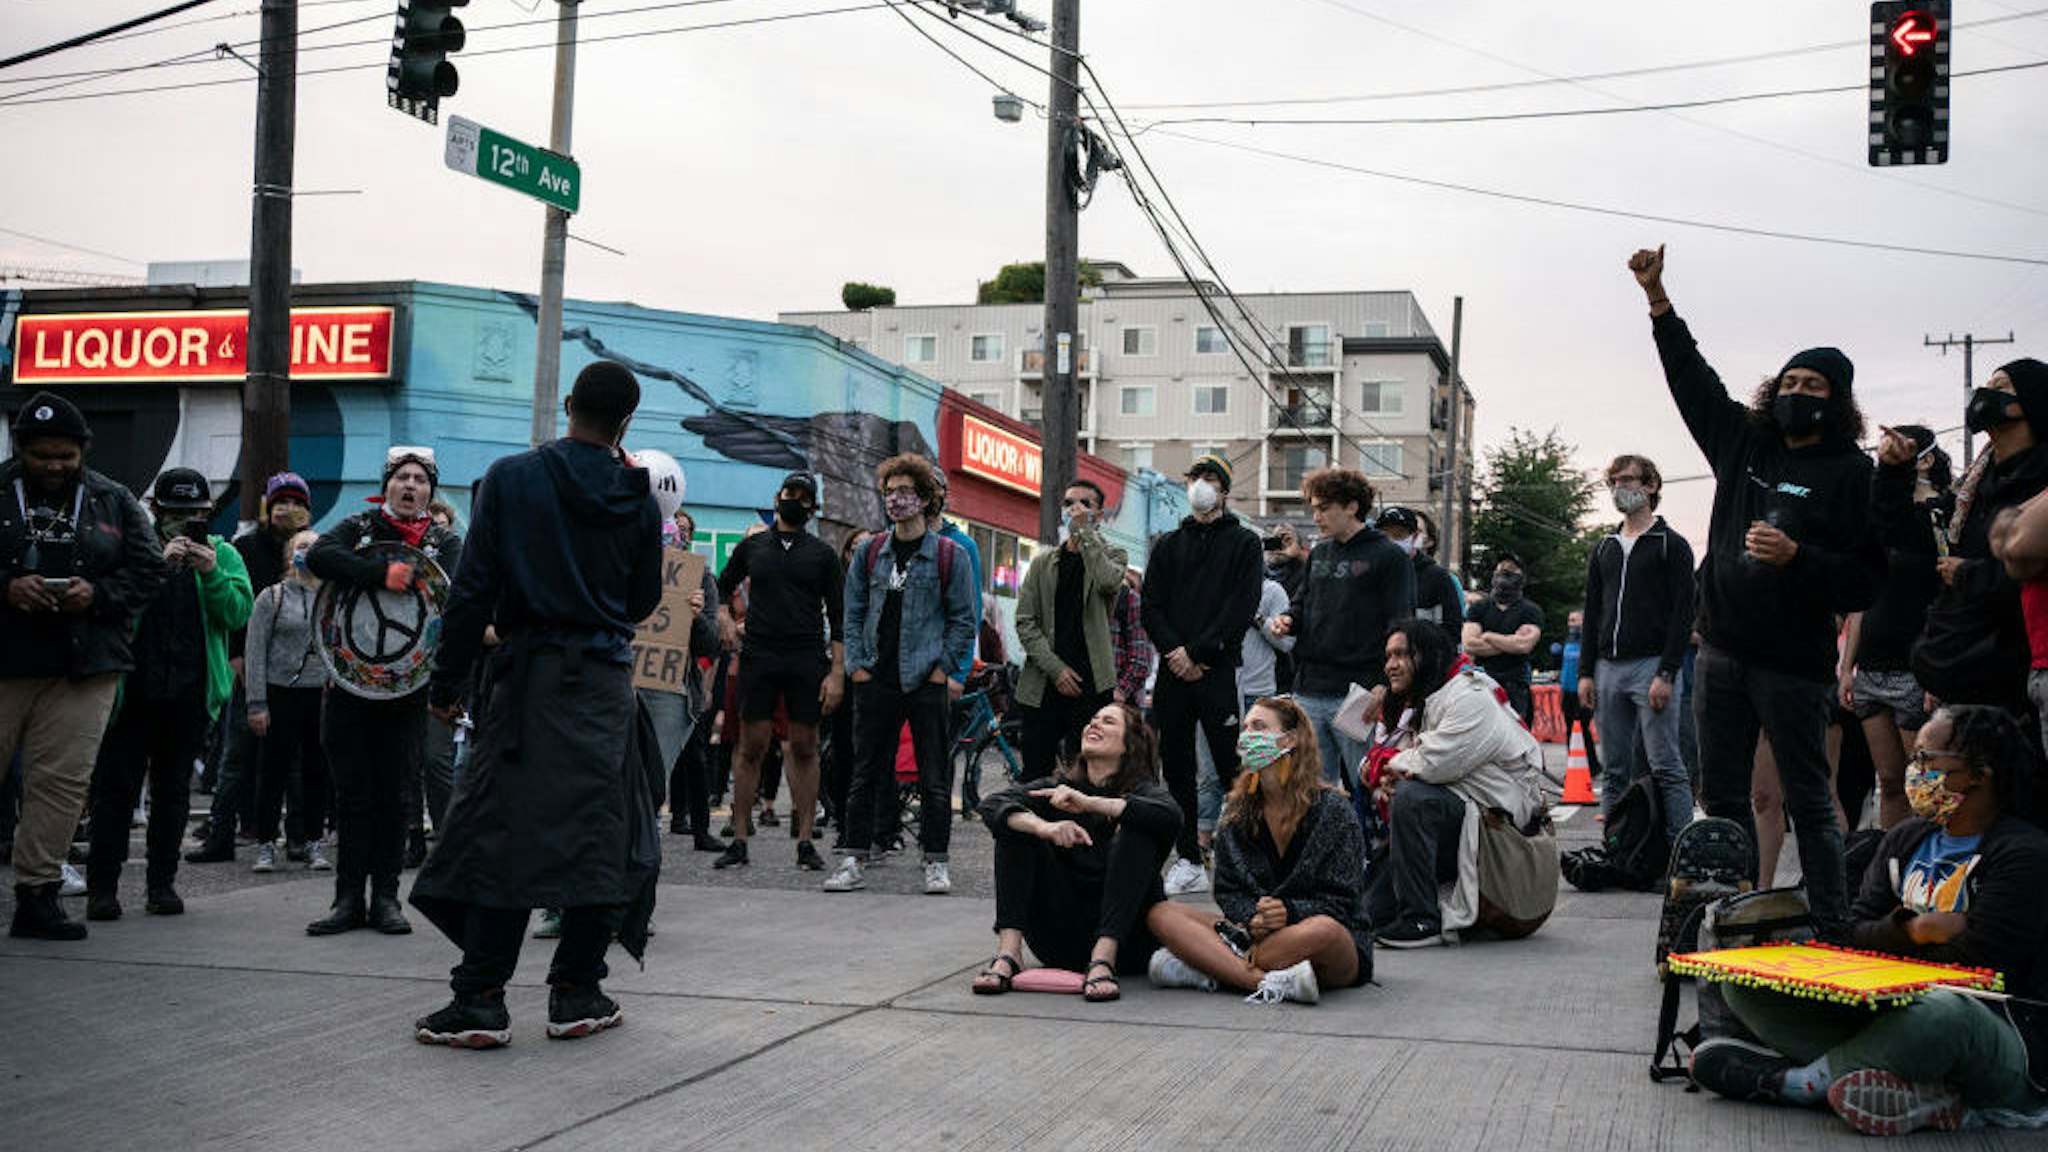 People rally in front of the Seattle Police Departments East Precinct in the so-called "Capitol Hill Autonomous Zone" on June 10, 2020 in Seattle, Washington. The zone includes the blocks surrounding the Seattle Police Departments East Precinct, which was the site of violent clashes with Black Lives Matter protesters, who have continued to demonstrate in the wake of George Floyds death. (Photo by David Ryder/Getty Images)